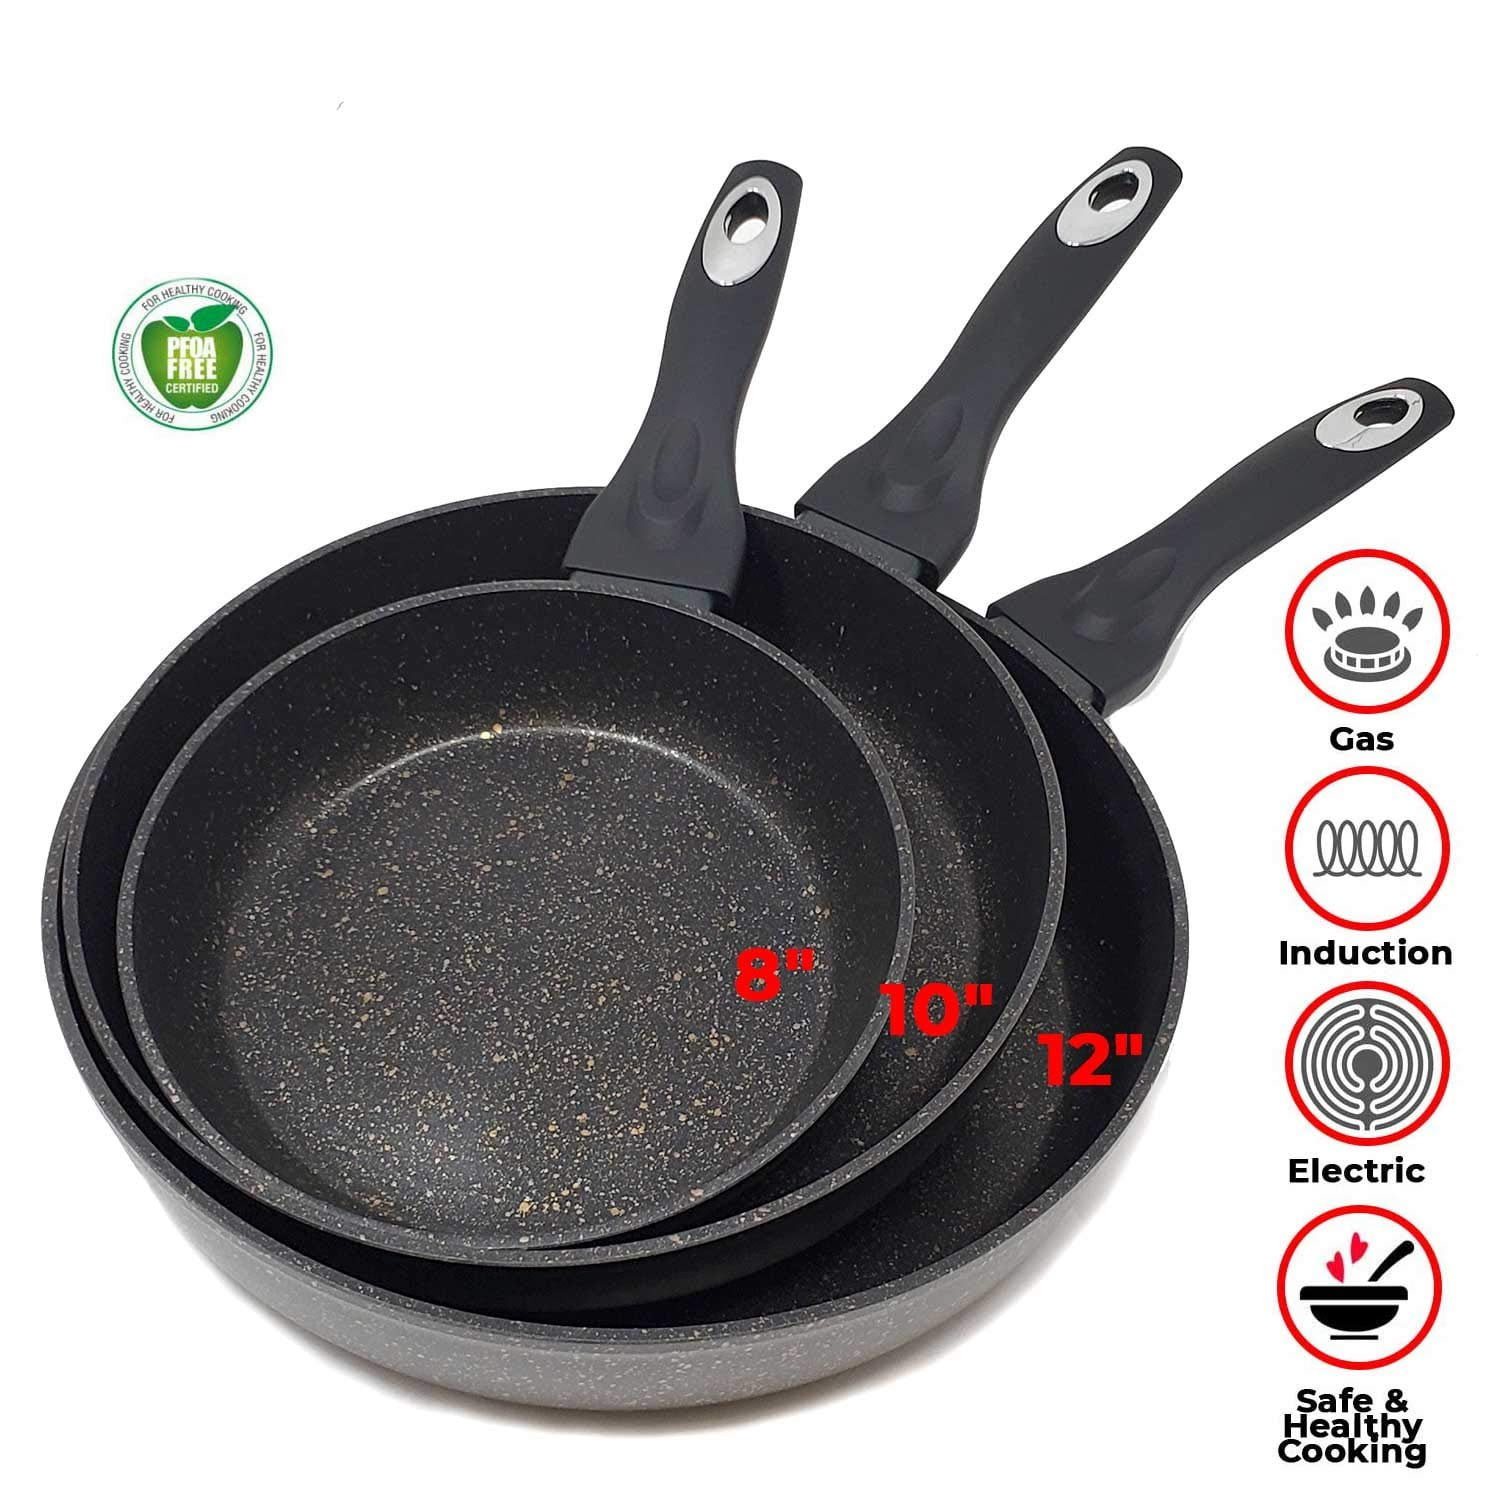 KITCHENLY Nonstick Frying Pans with Lids - Granite Frying Pans with Stone Coating | Nonstick Skillet Cooking Pan Set | Electric, GAS Induction